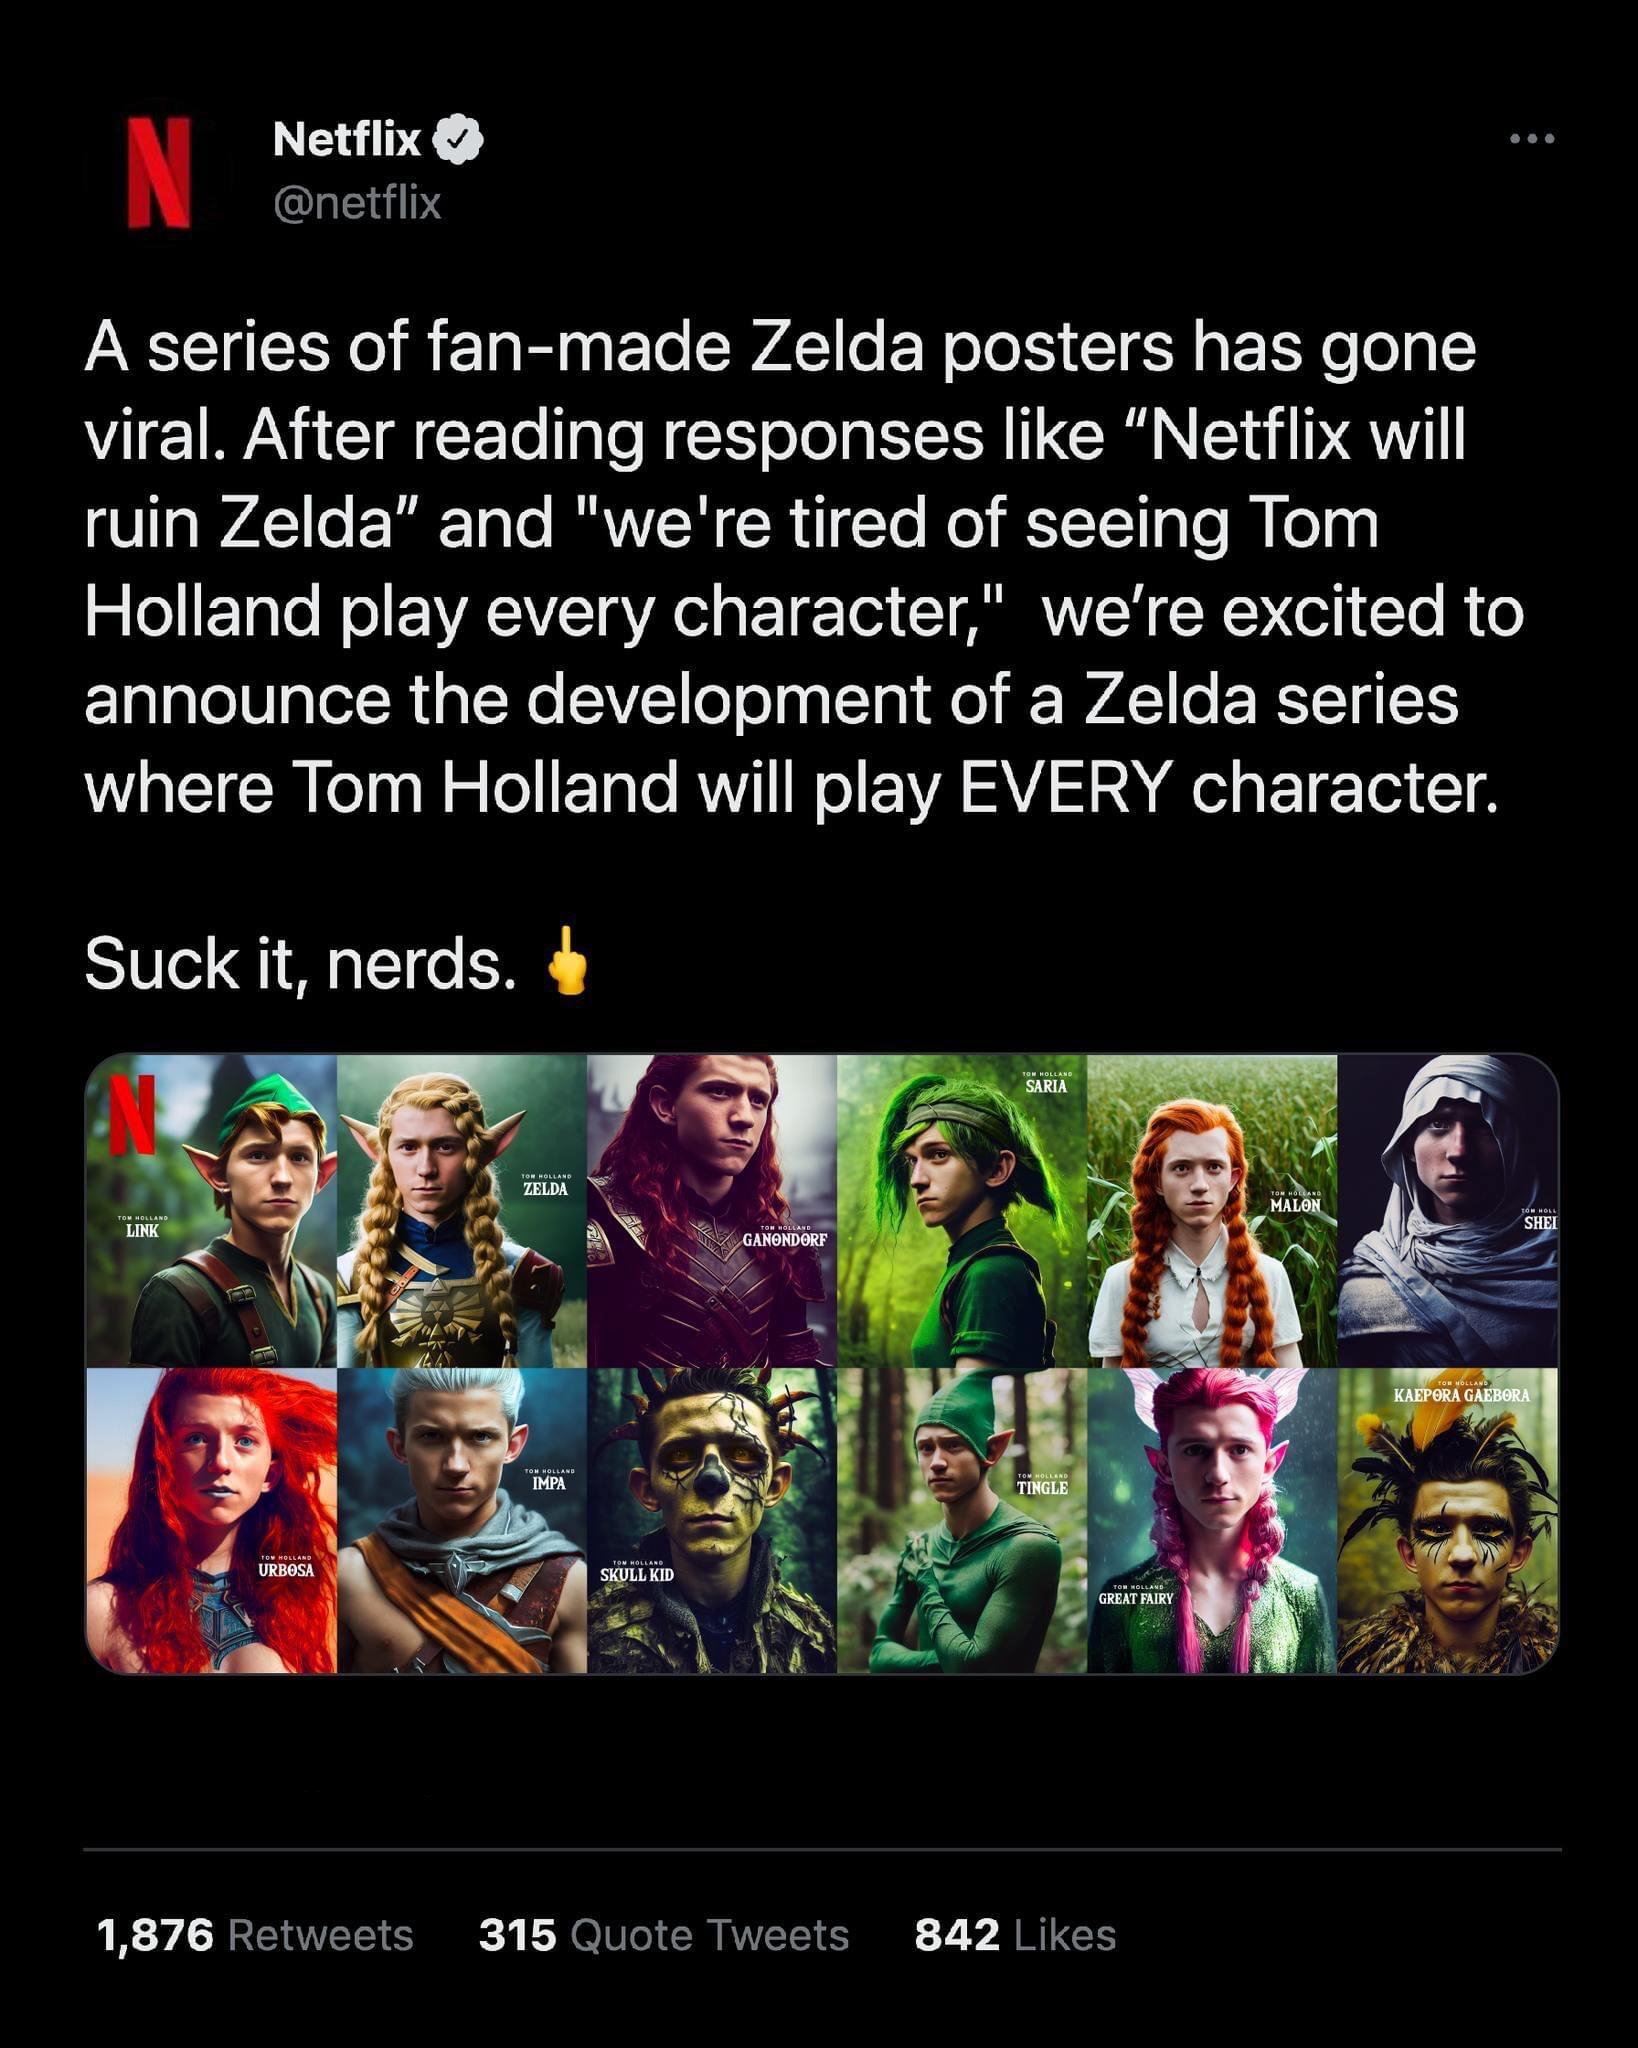 monday morning randomness - poster - Netflix N A series of fanmade Zelda posters has gone viral. After reading responses "Netflix will ruin Zelda" and "we're tired of seeing Tom Holland play every character," we're excited to announce the development of a